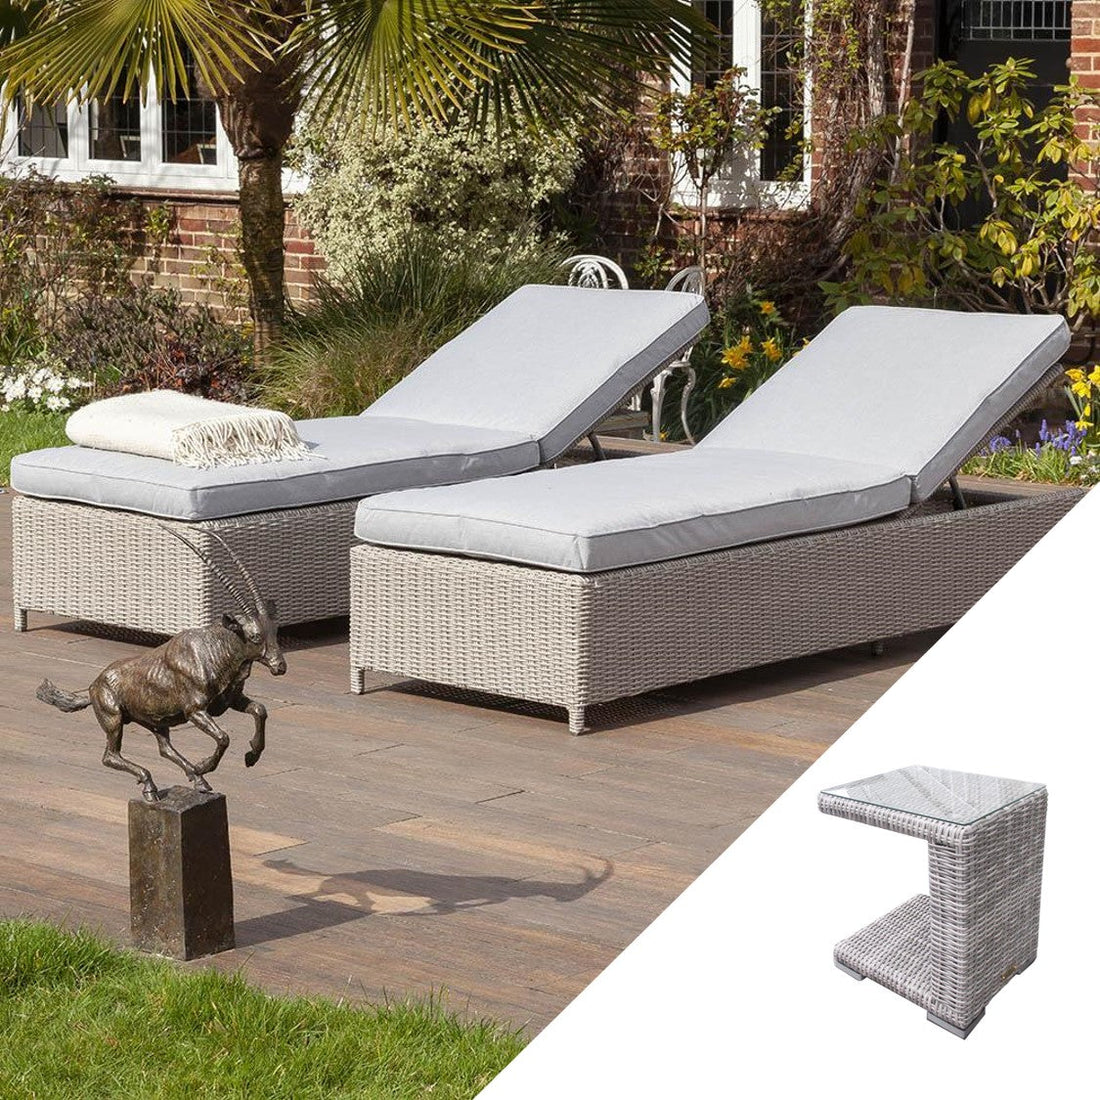 Fiennes Luxury Sun Lounger and Table Set